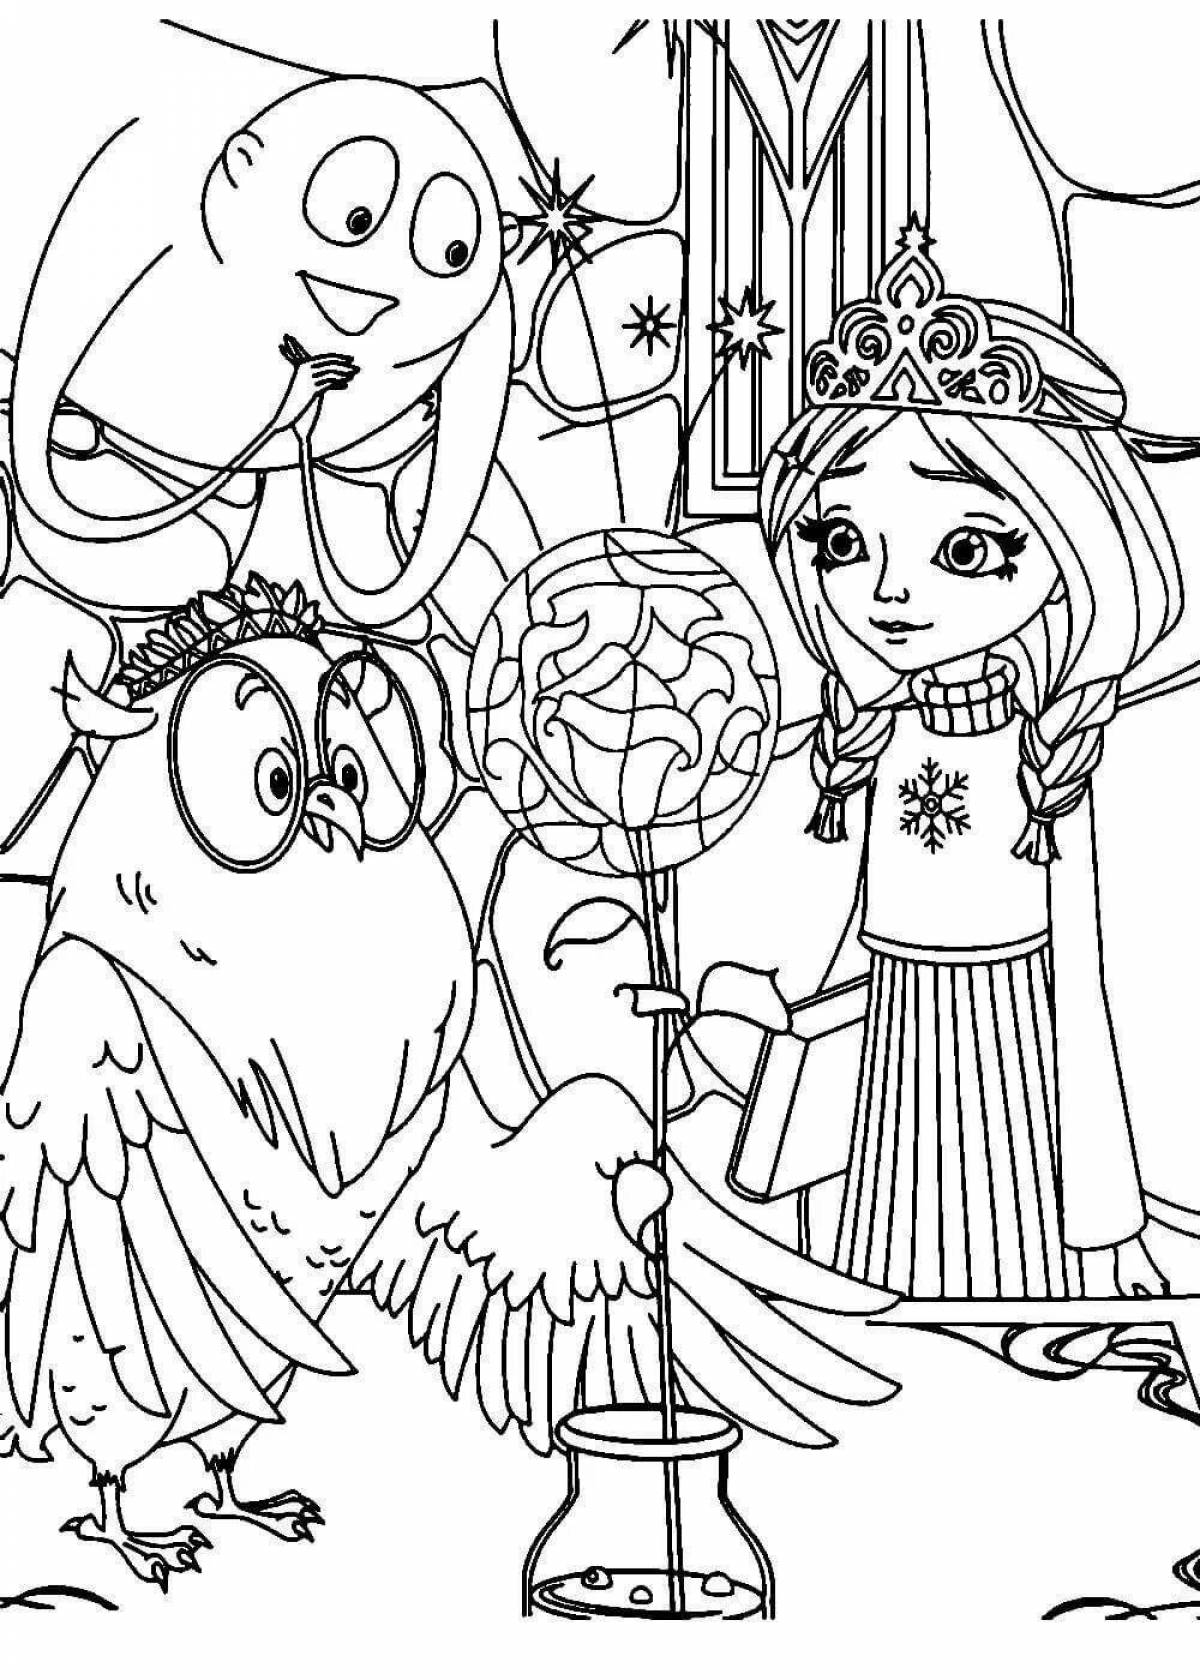 Exquisite coloring pages of princesses all together